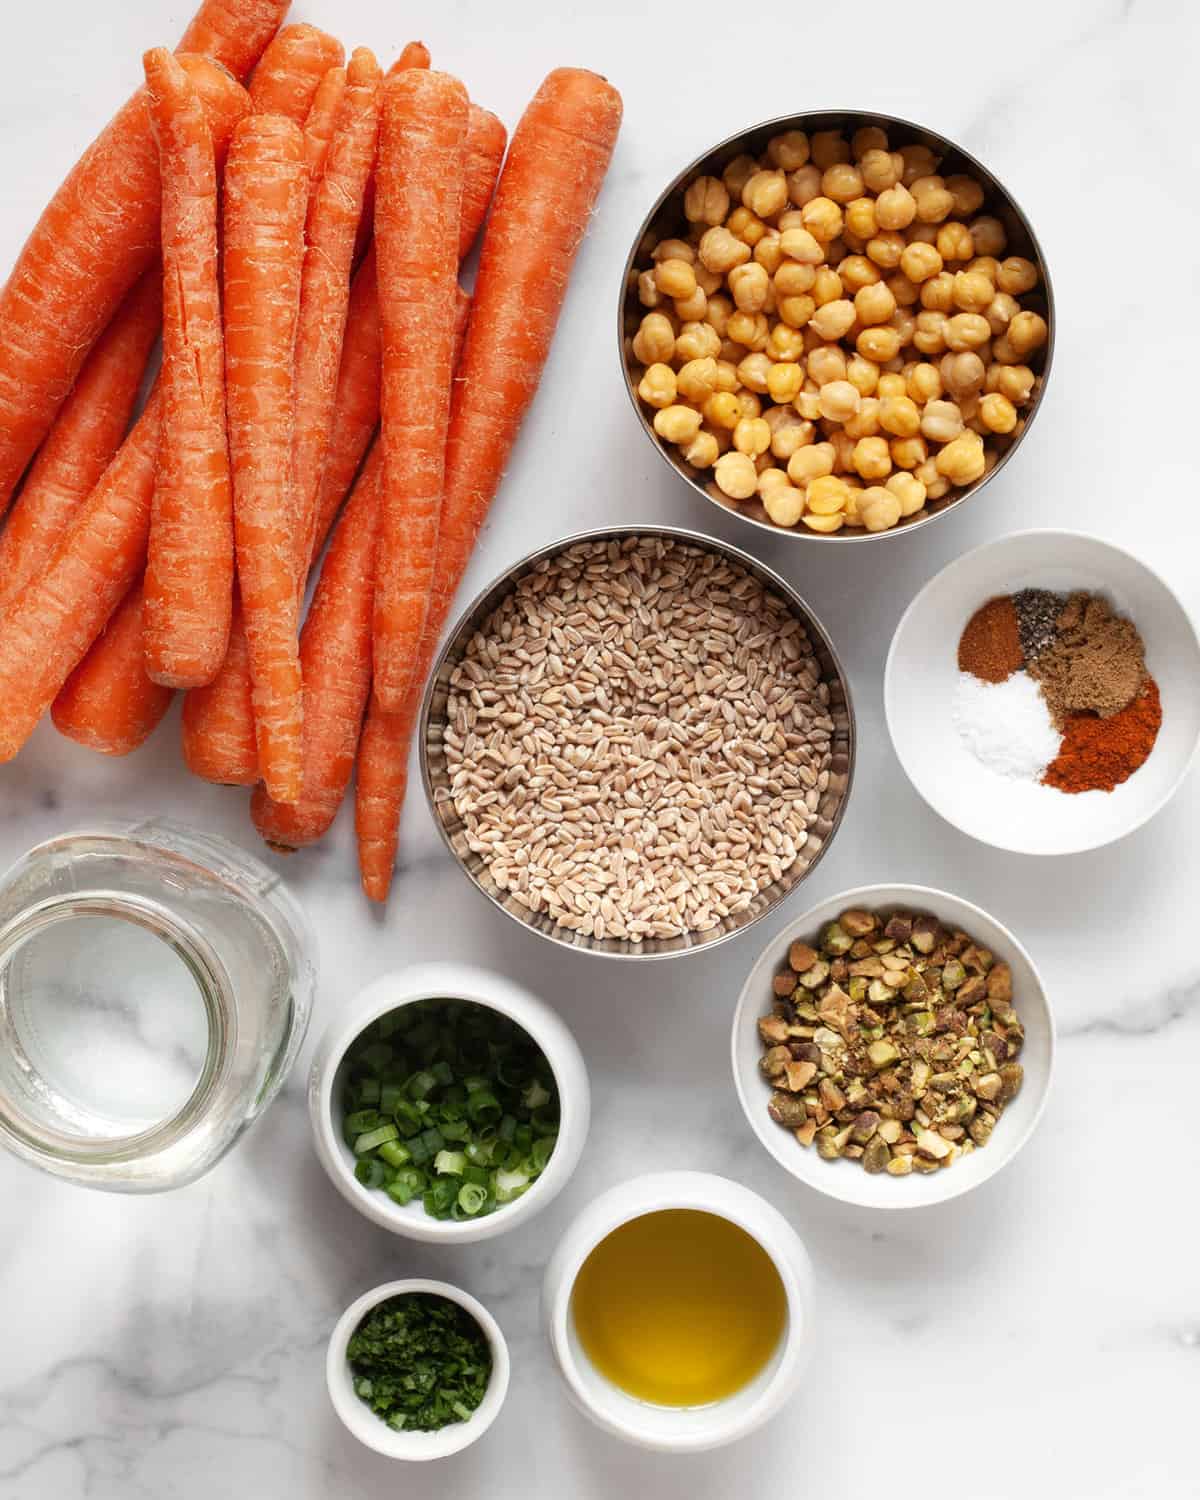 Ingredients including carrots, chickpeas, farro, scallions, parsley, pistachios, olive oil and spices.